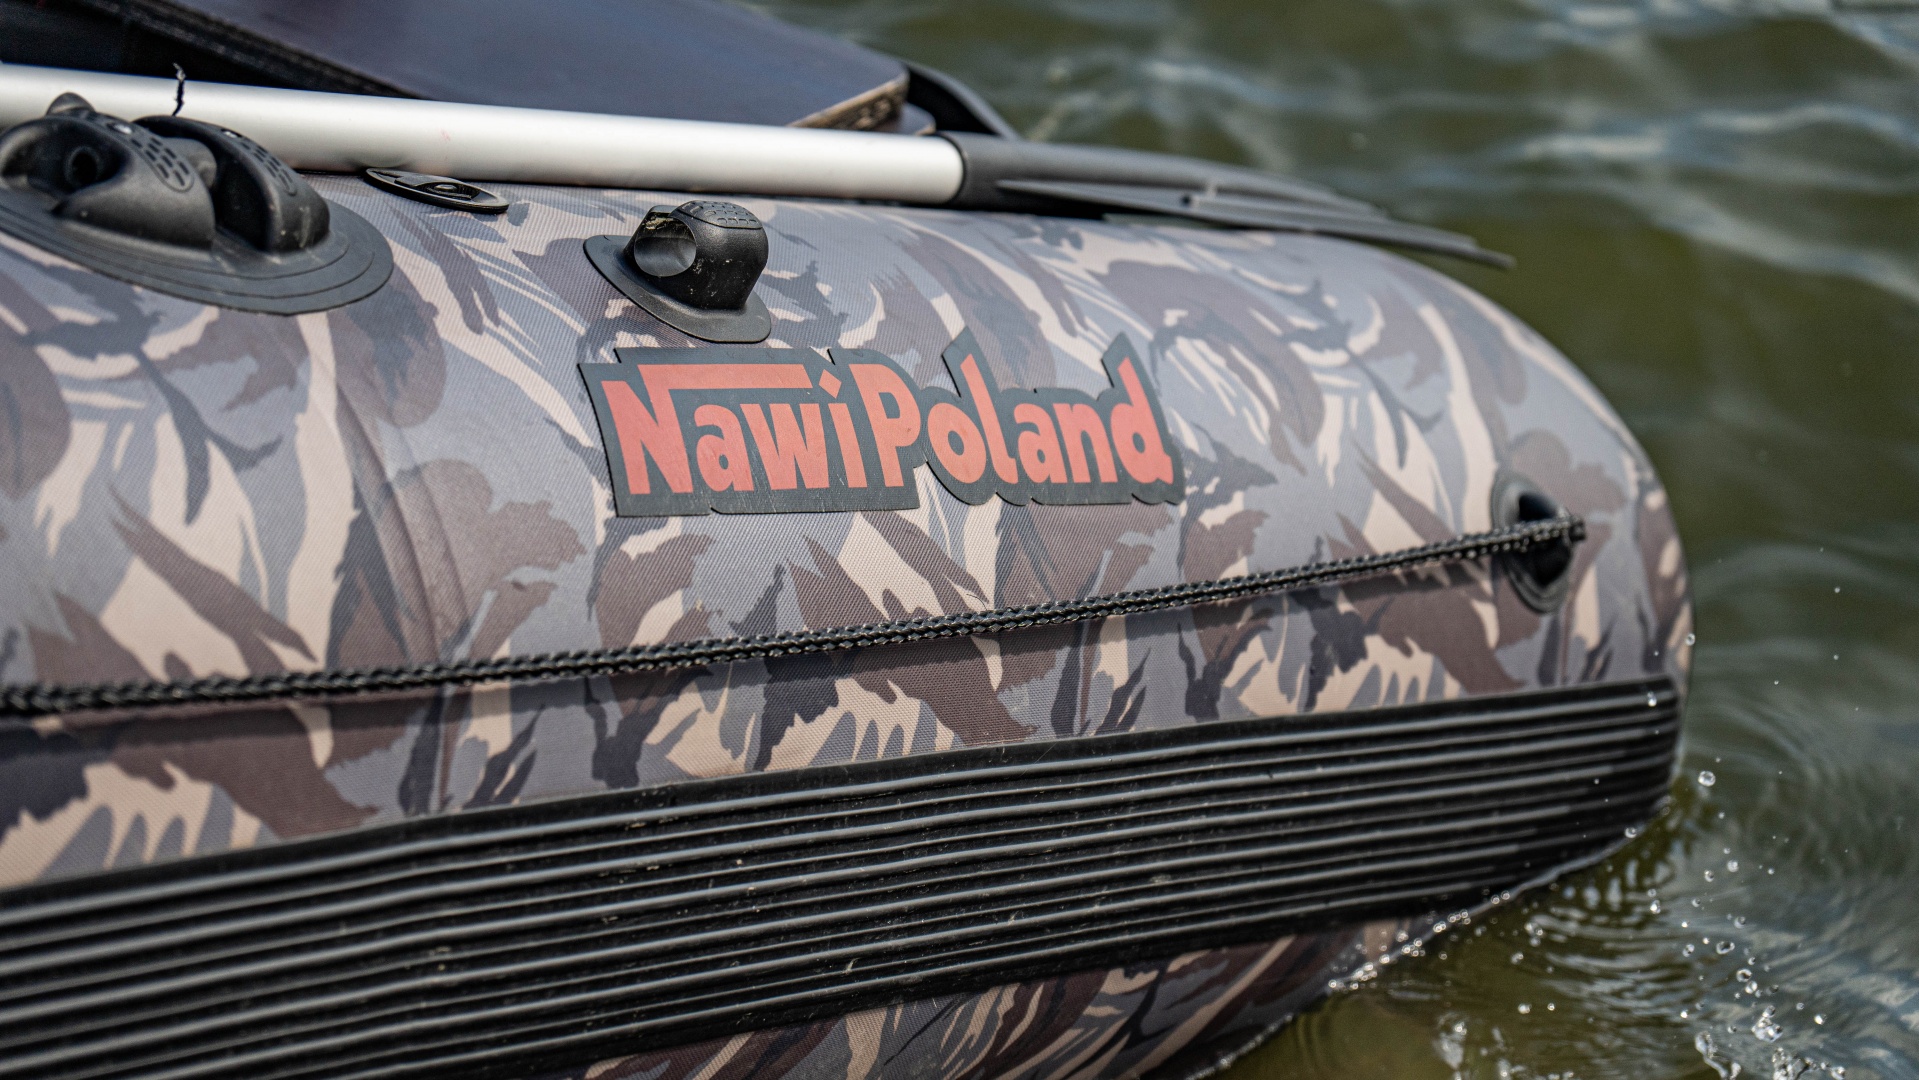 NawiPoland CAT 300 Inflatable Boat  - Катамаран